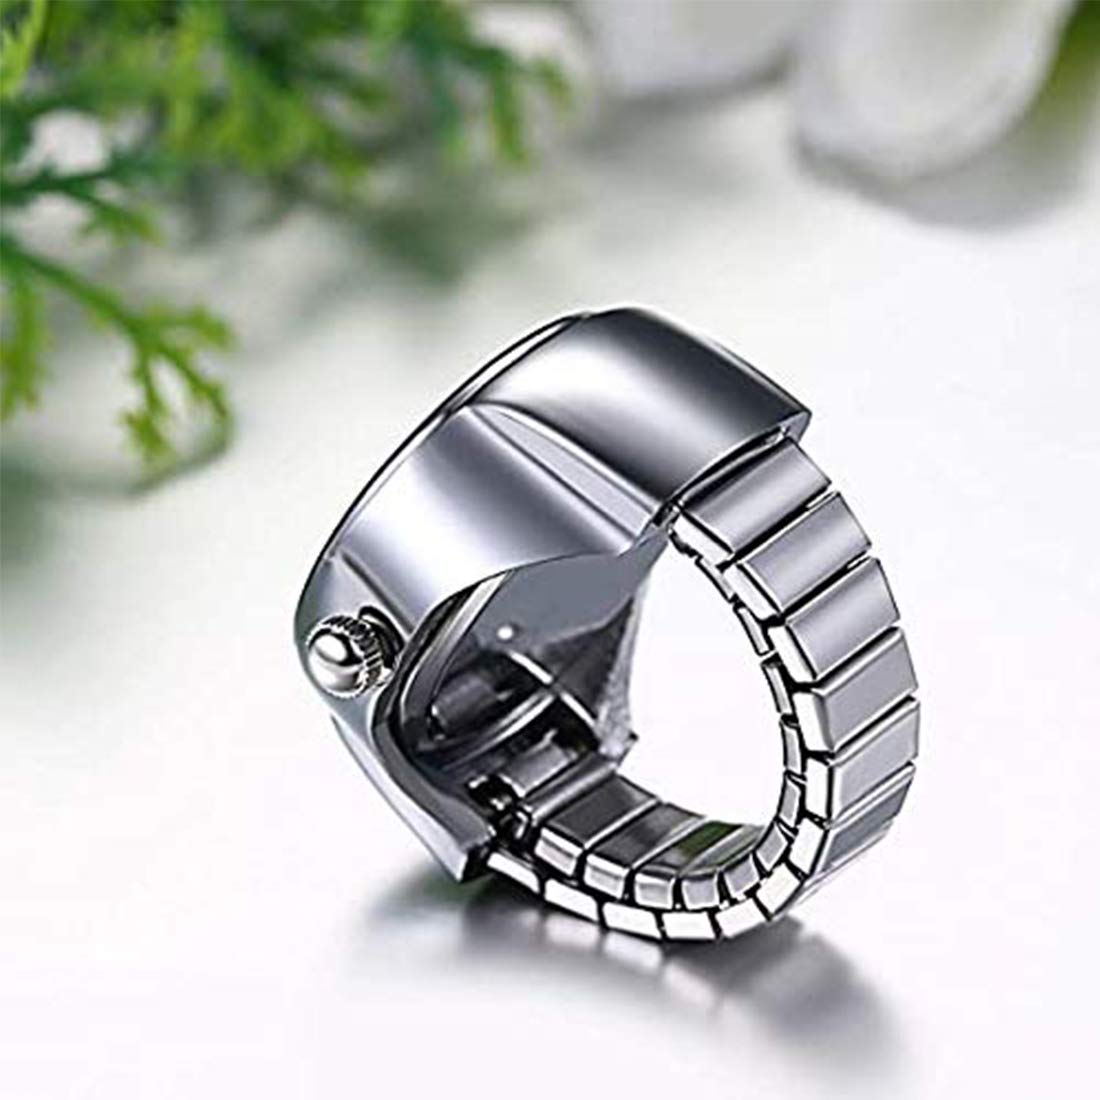 Yellow Chimes Rings for Women Stainless Steel Purple Dial Analog Watch Ring Stretchable Ring Watch for Women and Girls.